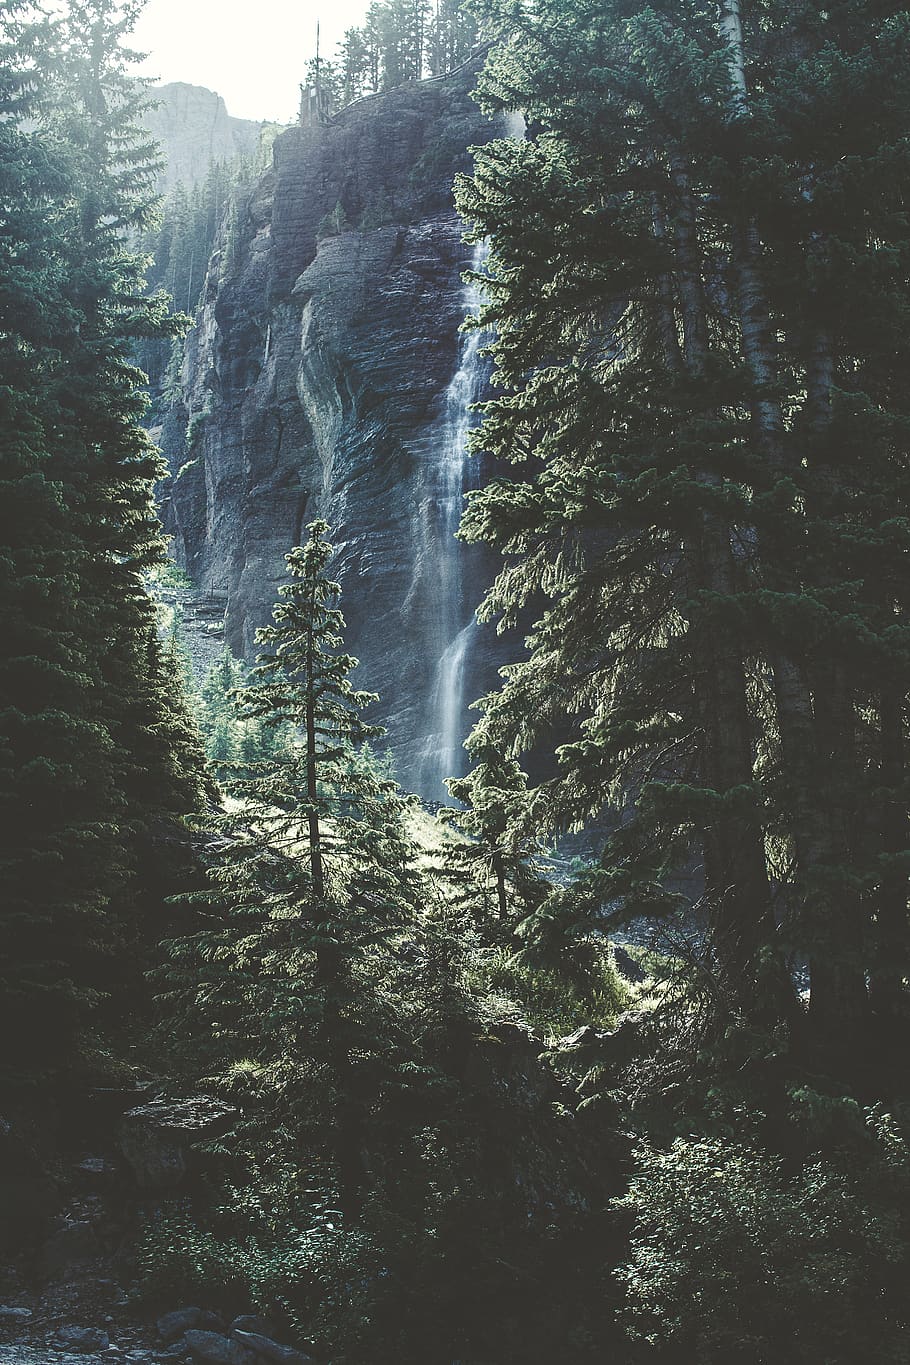 pine, trees, leaves, forest, hill, rocks, water, fall, waterfalls, nature